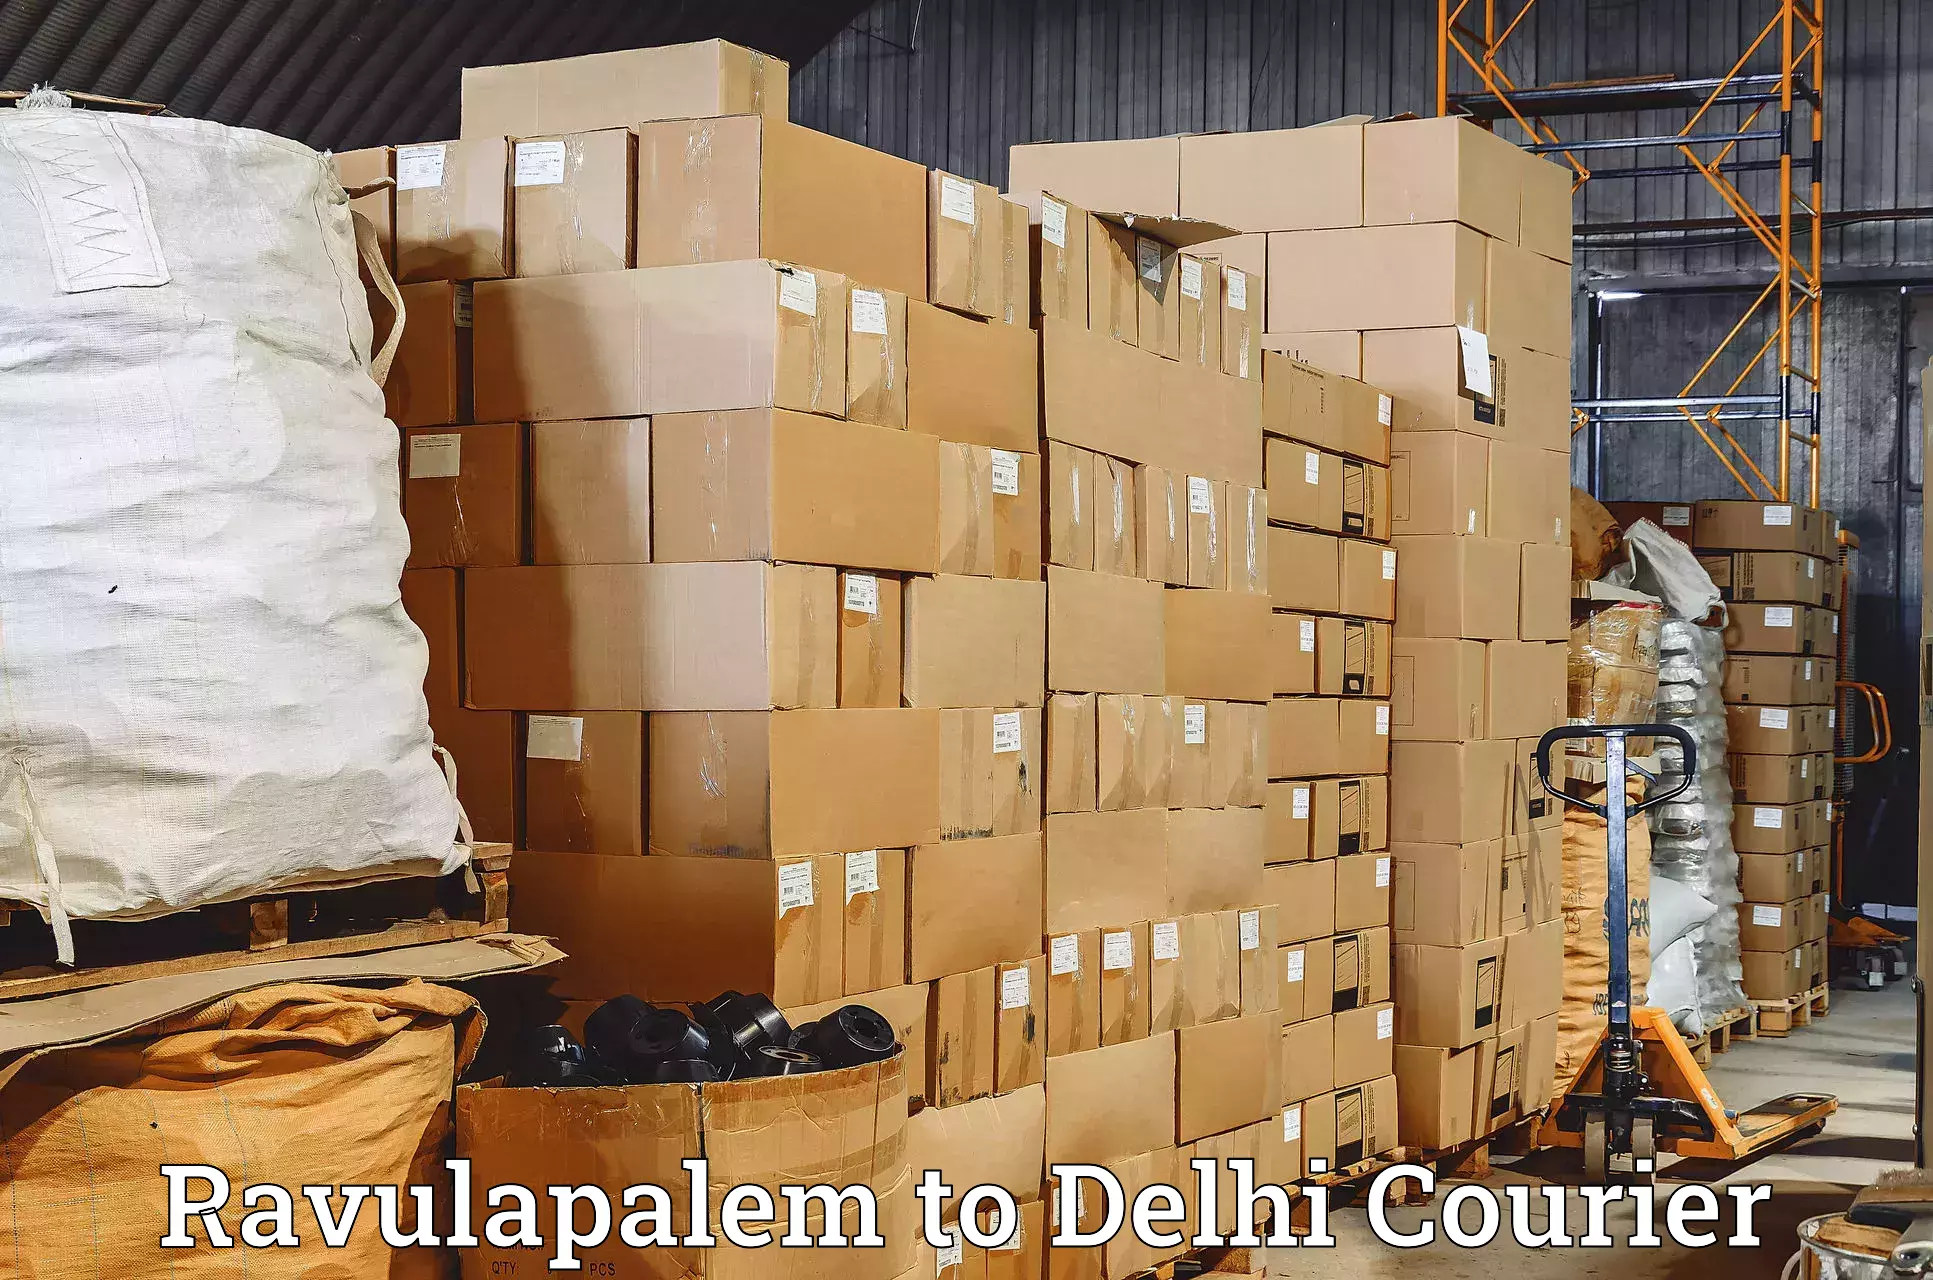 Comprehensive shipping network Ravulapalem to Lodhi Road